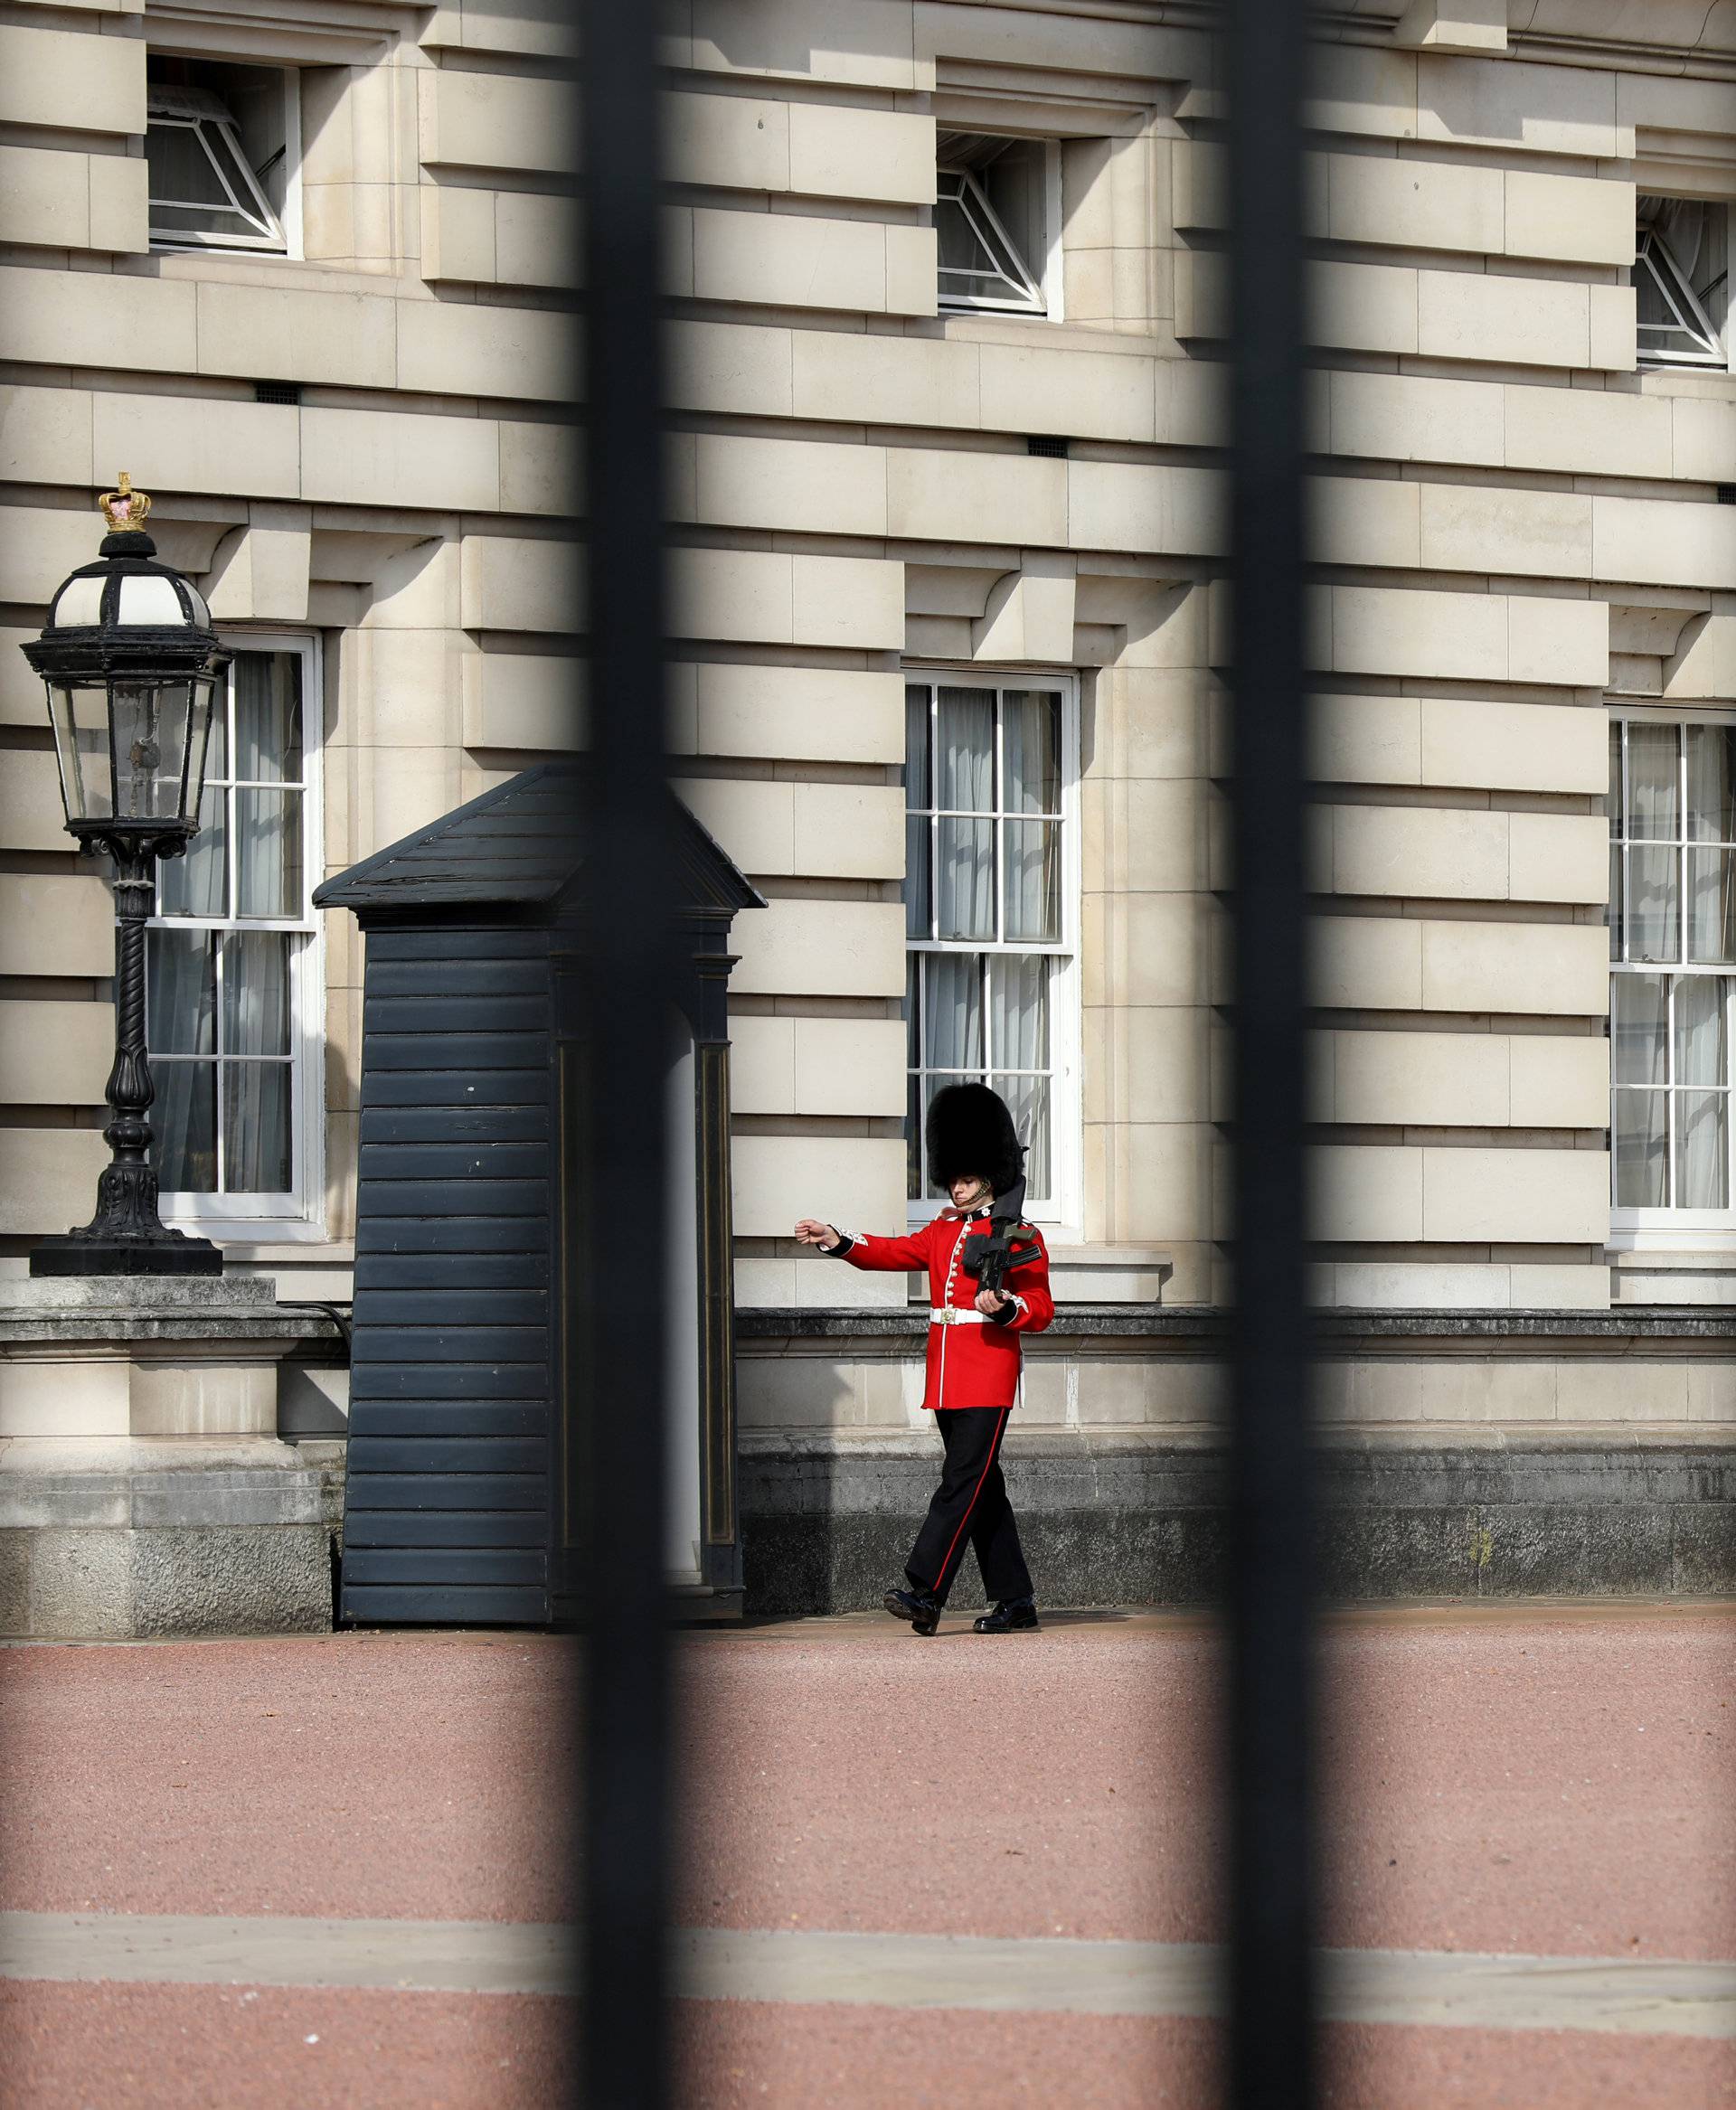 A guardsman is seen on duty in the grounds of Buckingham Palace in London